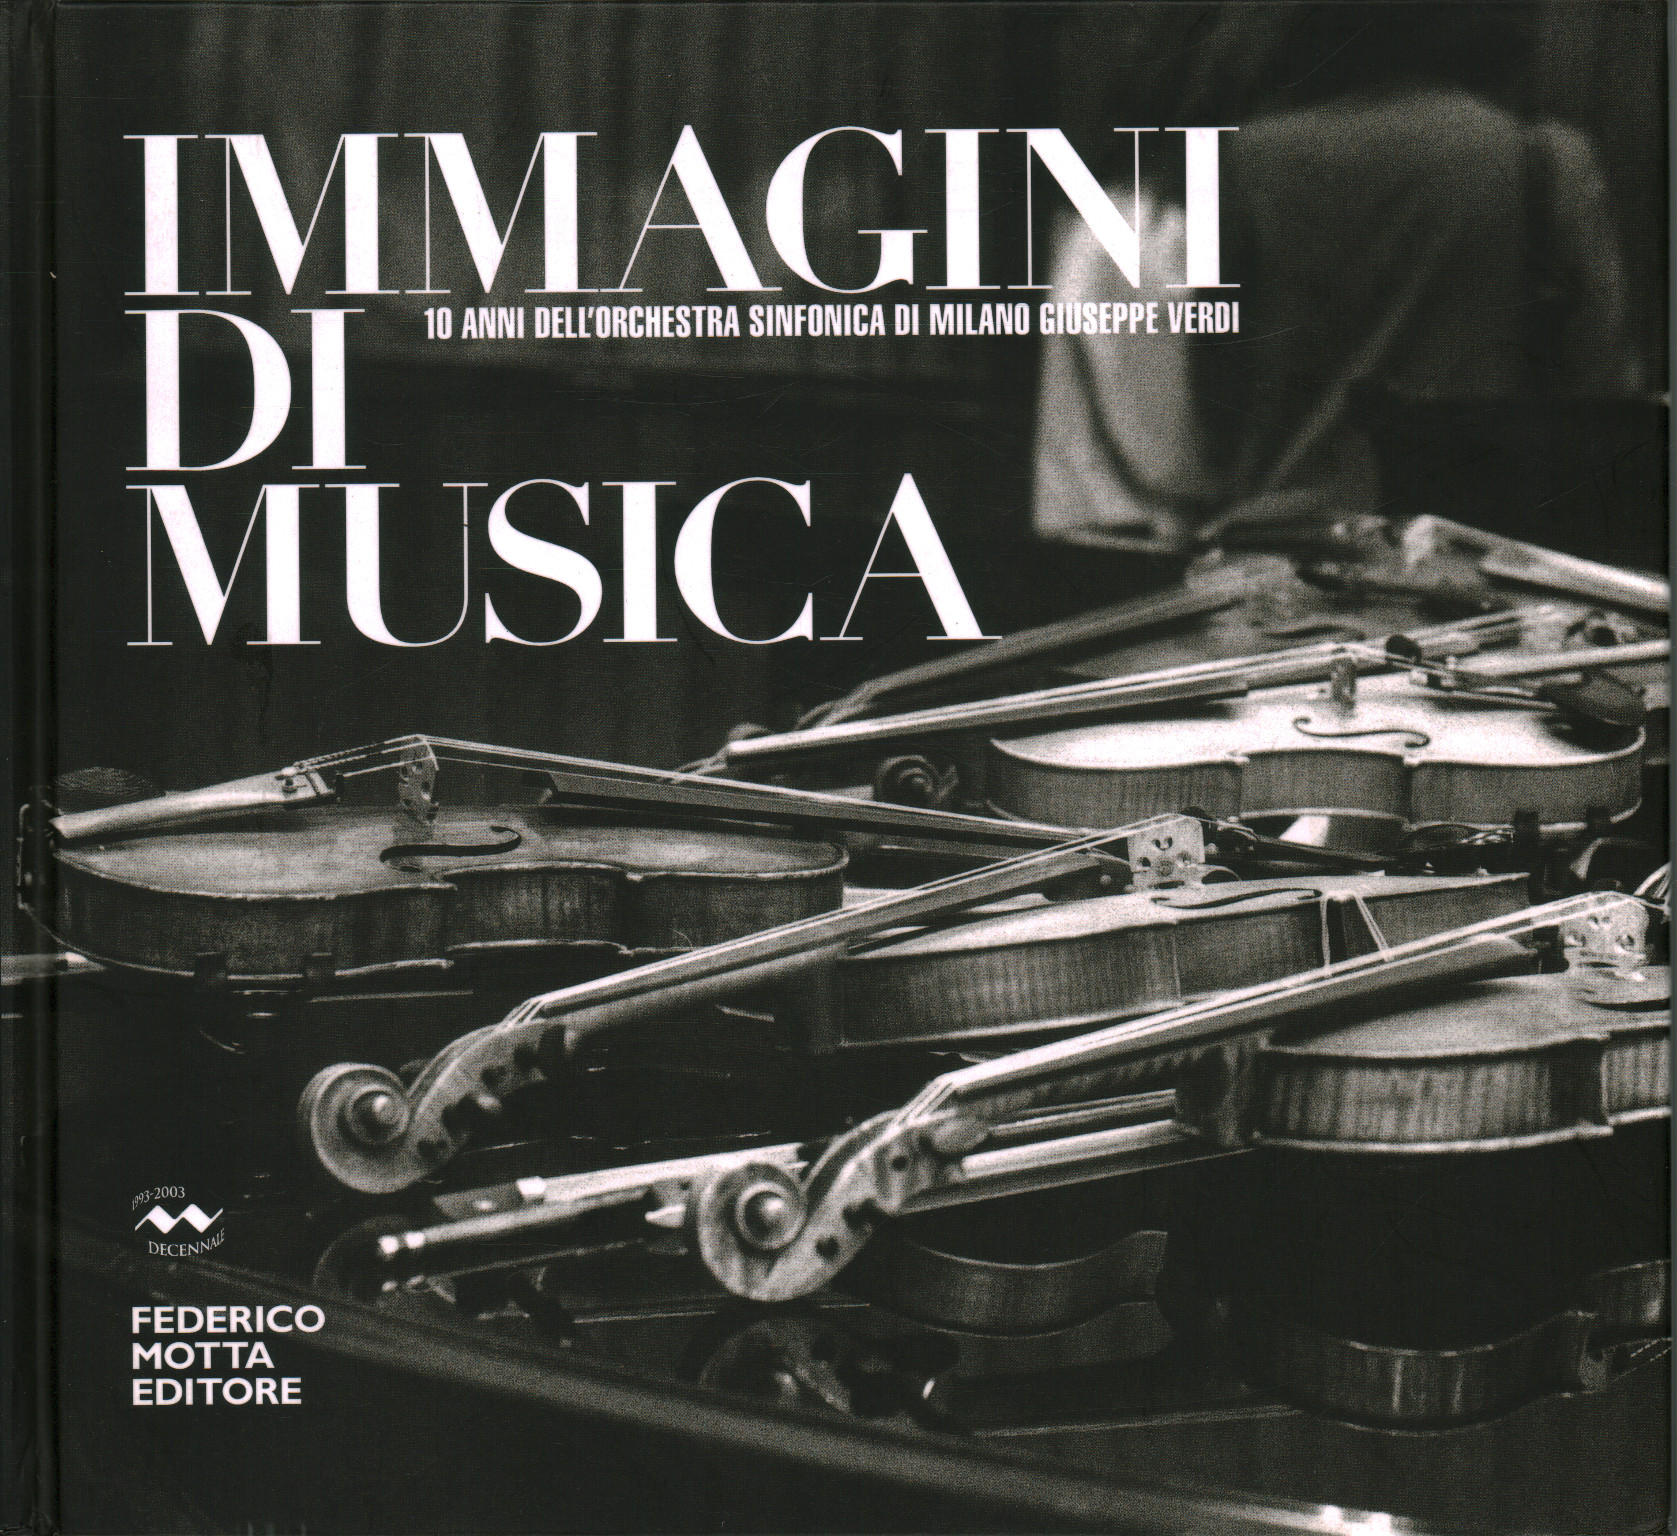 Images music, s.a.